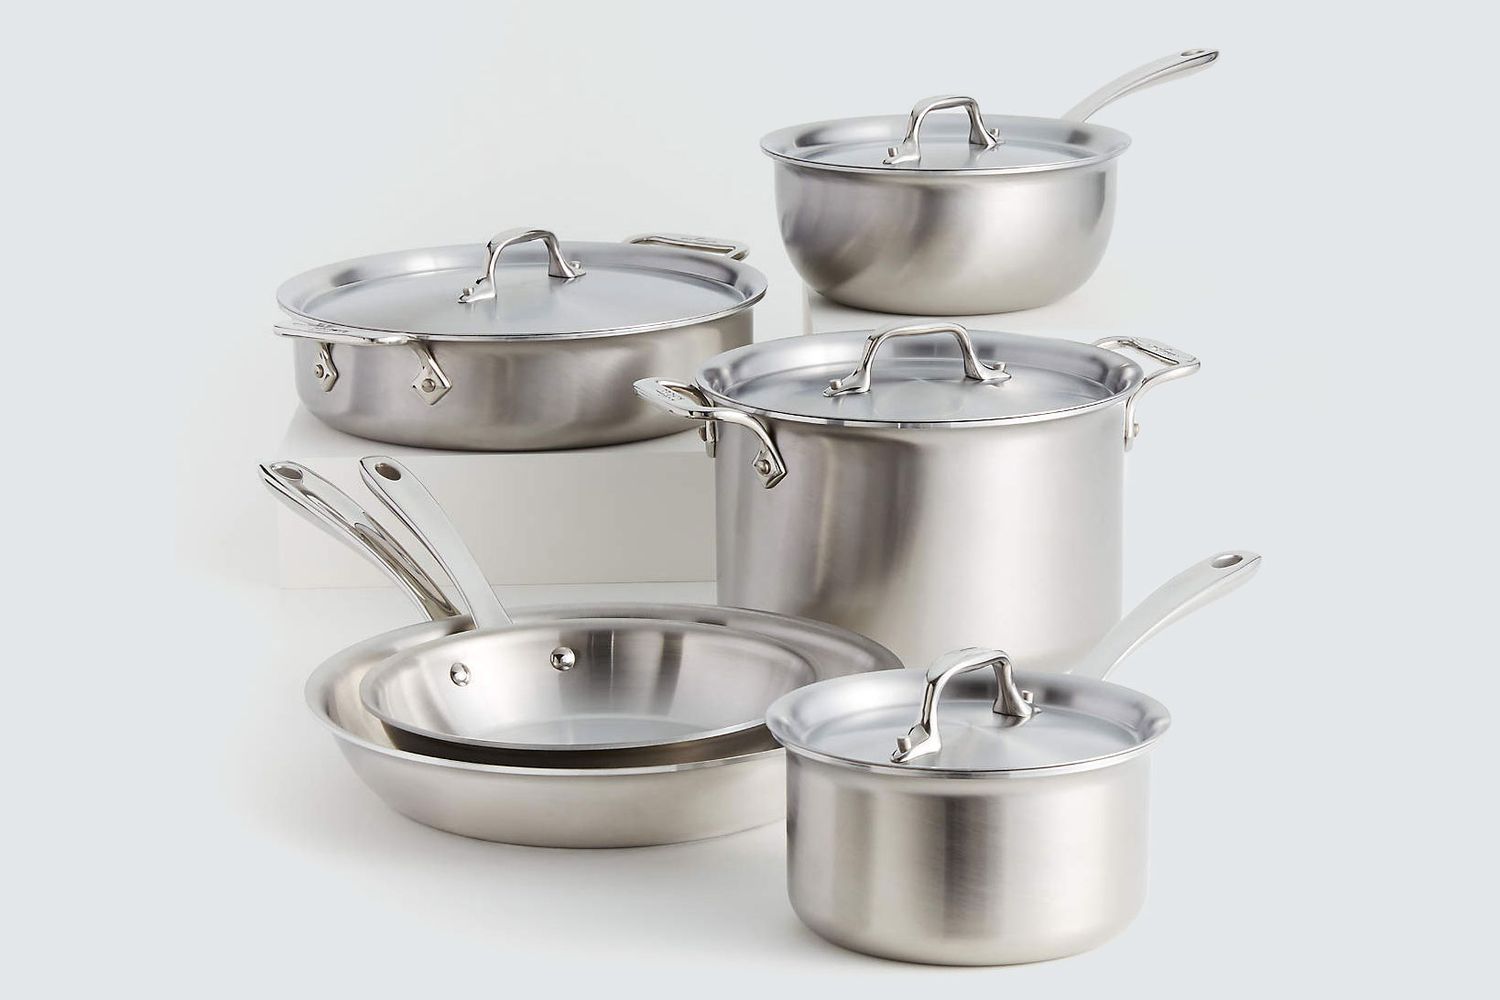 12Pcs 3 Different Sizes Separate and Protect Surfaces of Your Cookware for Home,Comes with 3 Pot Brushes Pot or Pan Protectors 